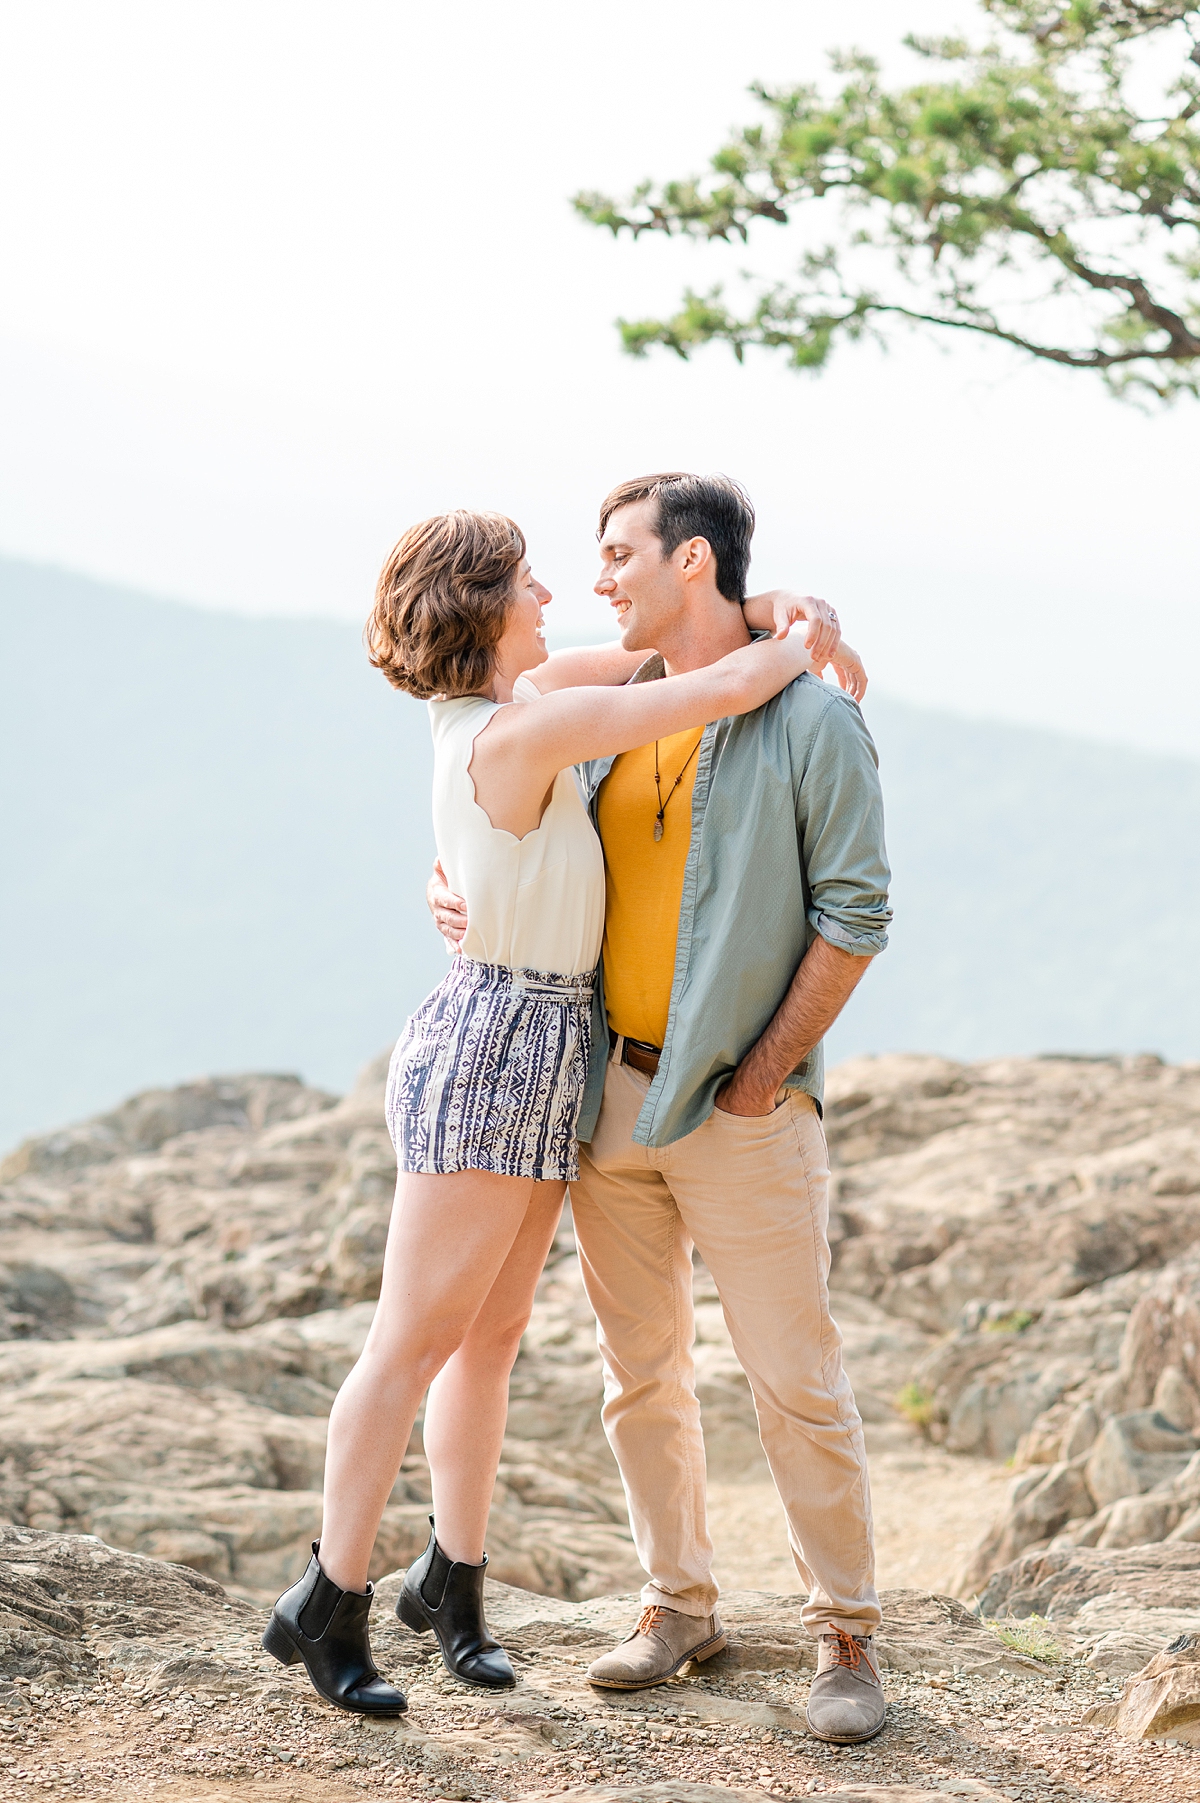 A Summer Raven's Roost Overlook Engagement Session with Mountain Views and Boho Style Outfits. Photography by Virginia Wedding Photographer Kailey Brianne Photography. 